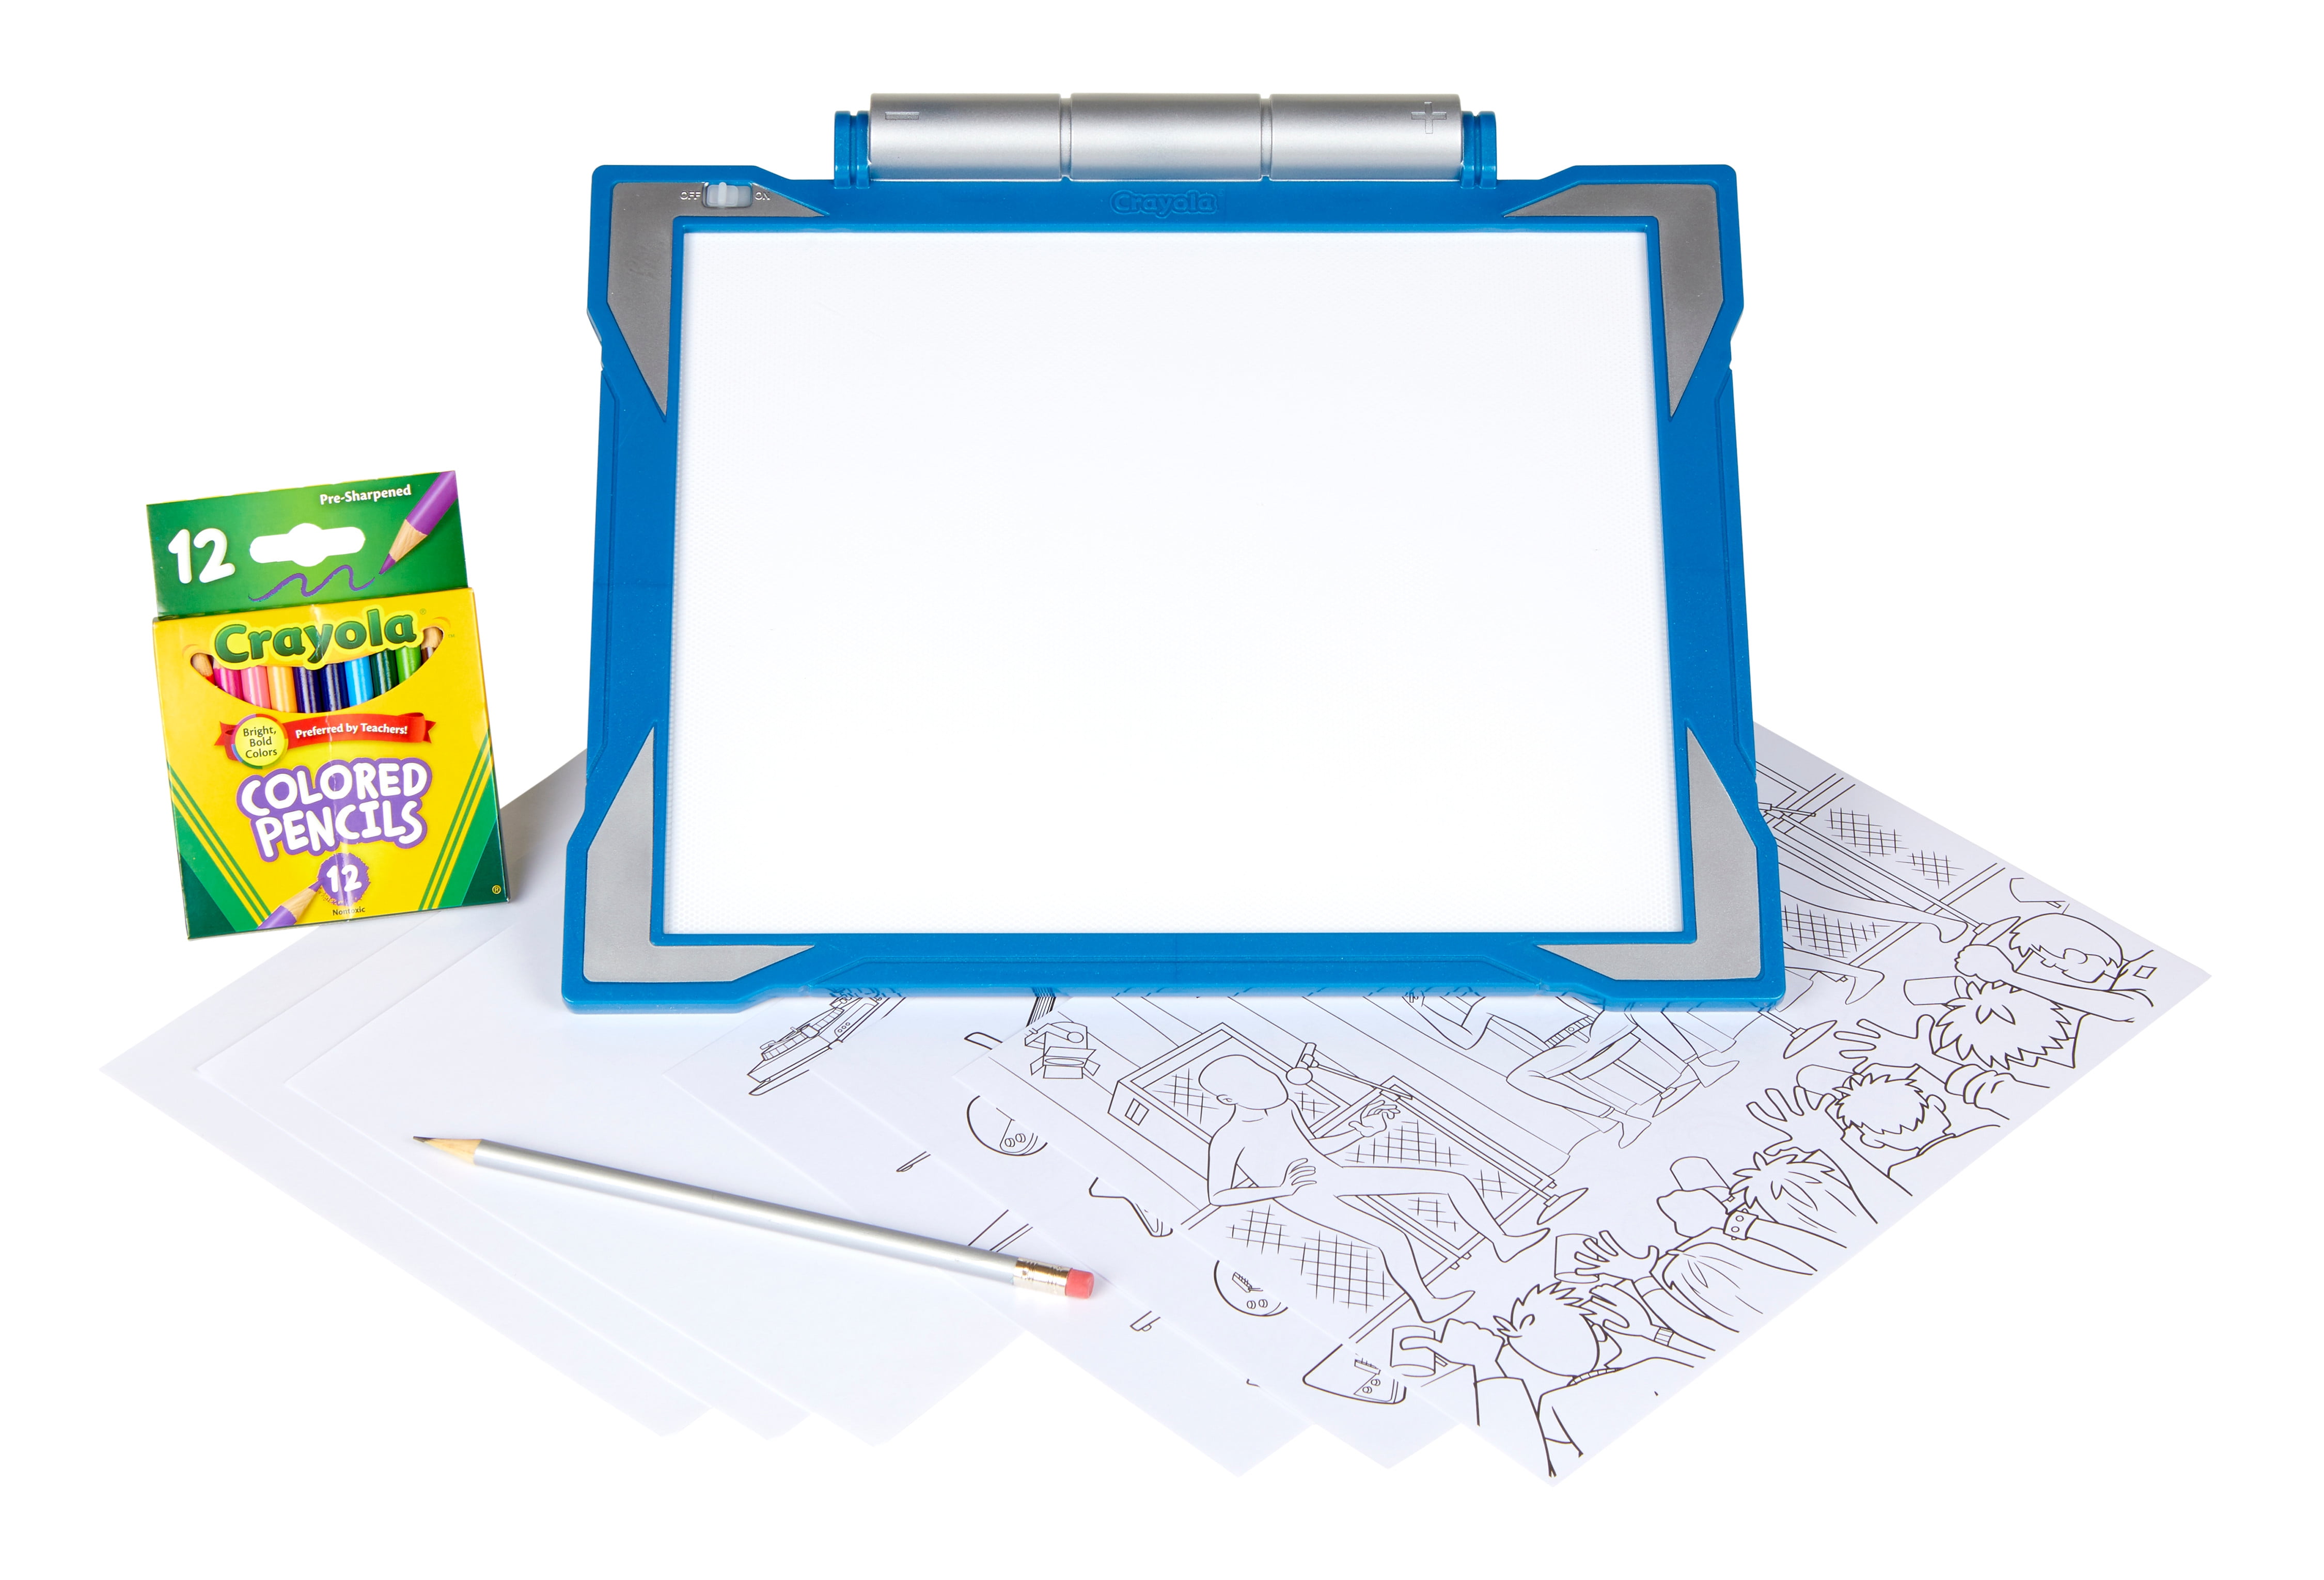  Crayola Light Up Tracing Pad with Night Mode and Colored Pencil  Set, Gift, Ages 6, 7, 8, 9, 10 : Toys & Games